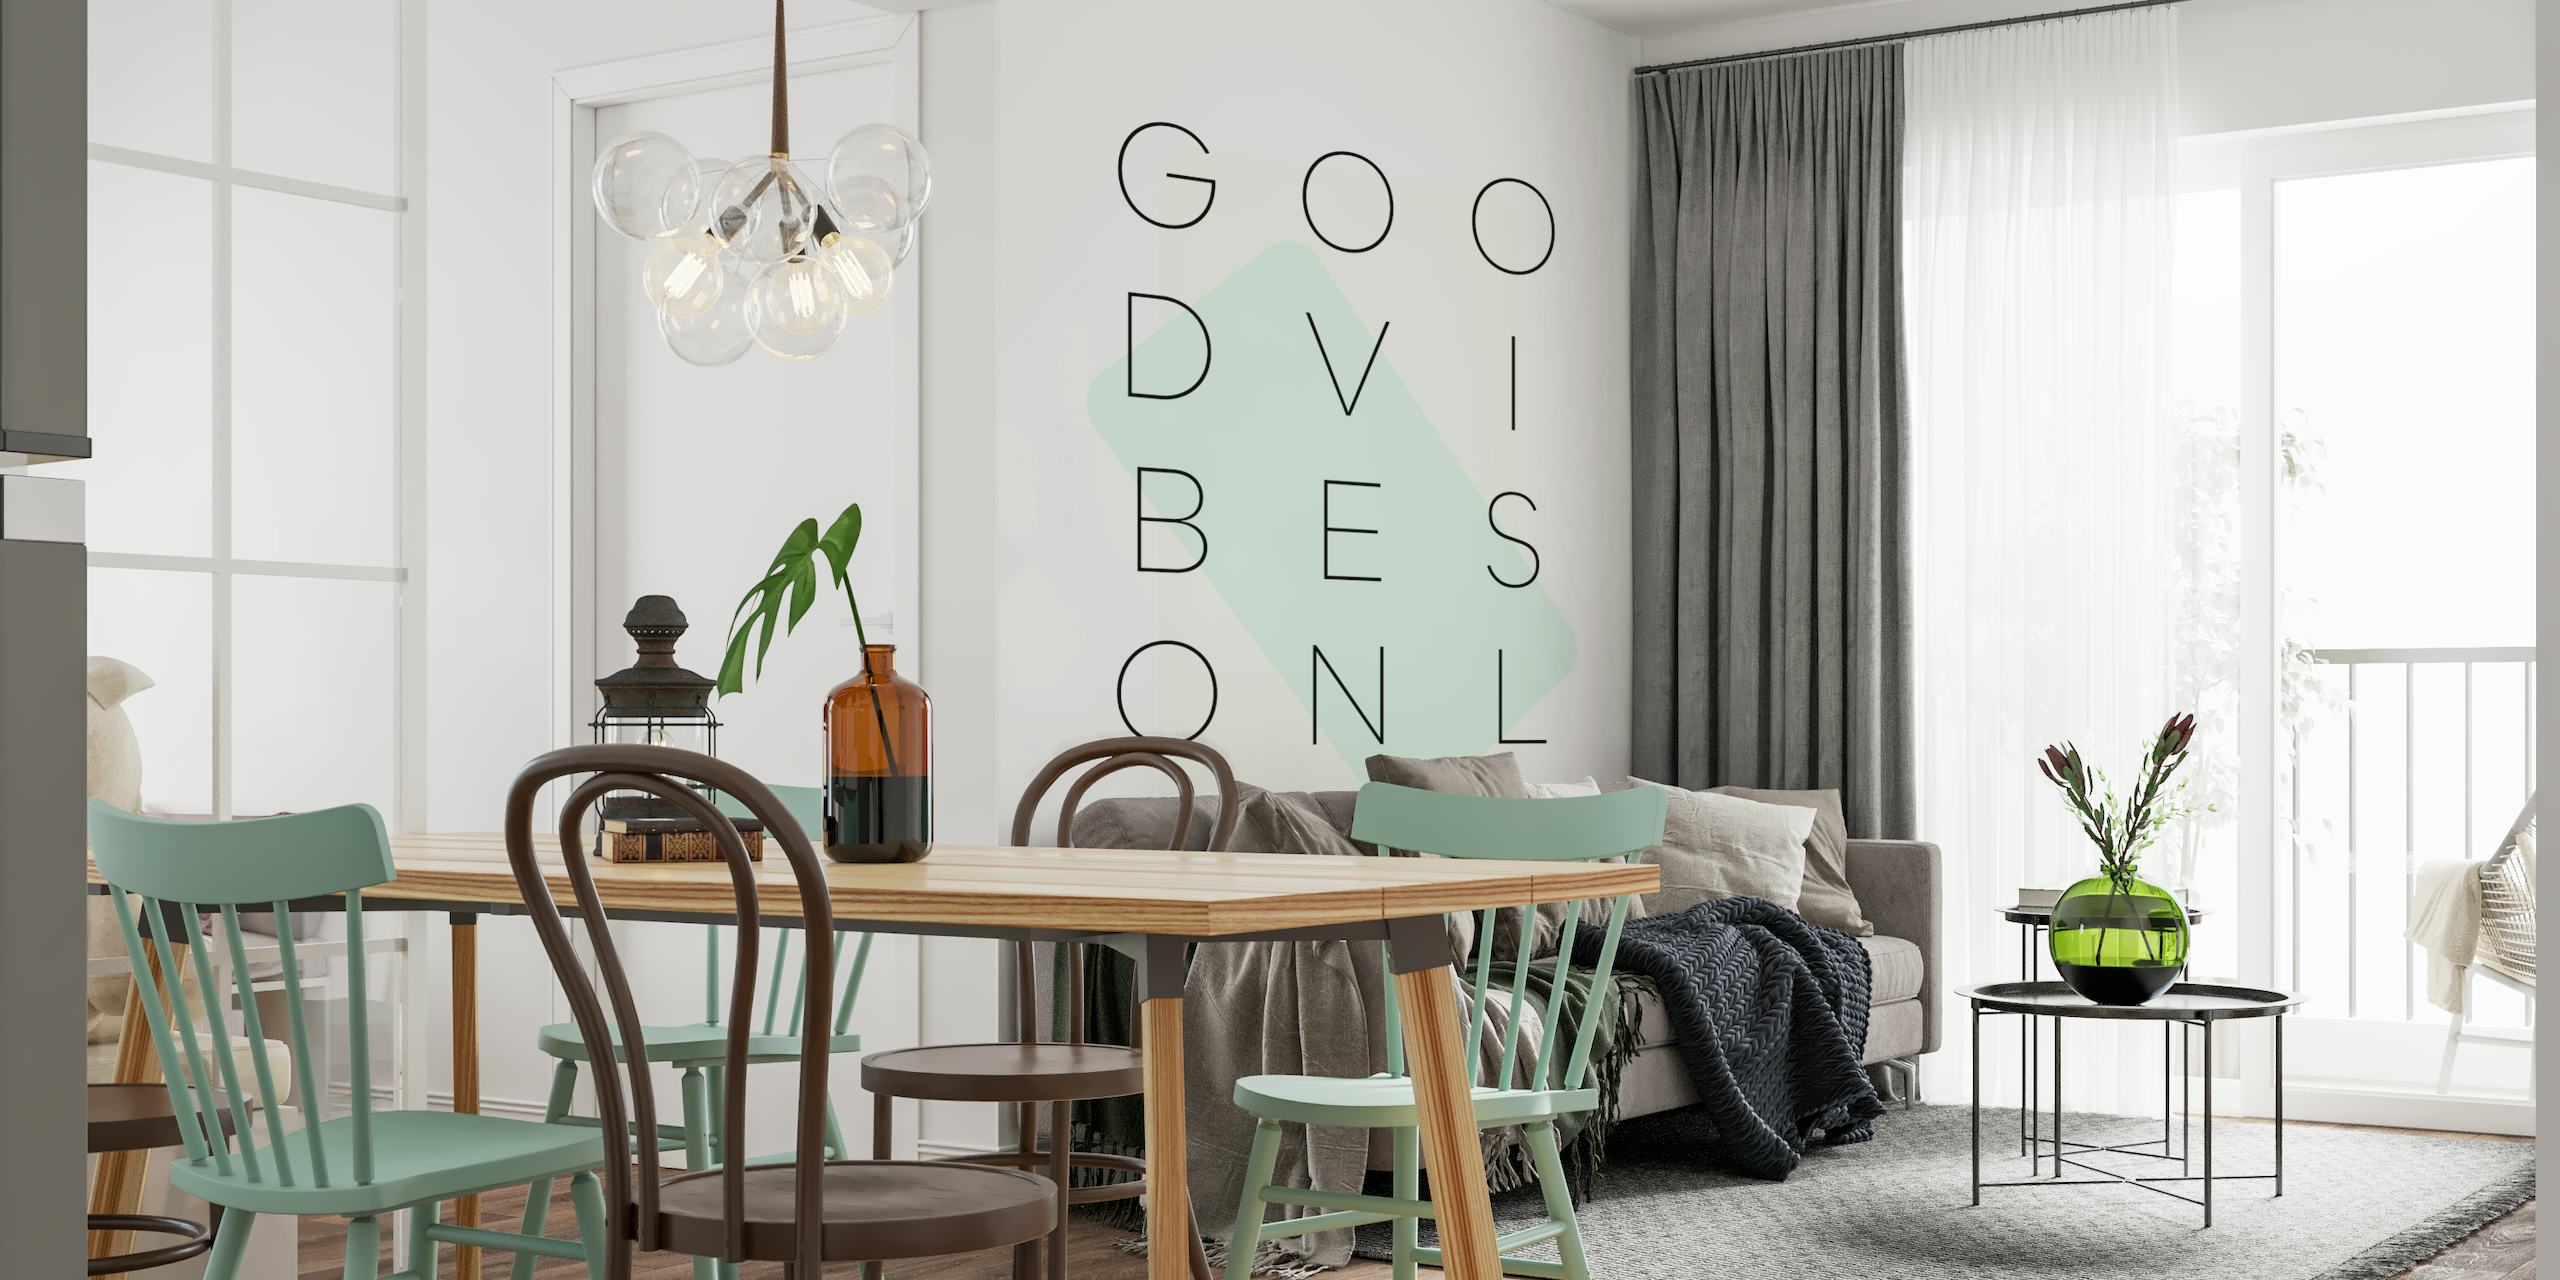 Good vibes only - turquoise papel pintado